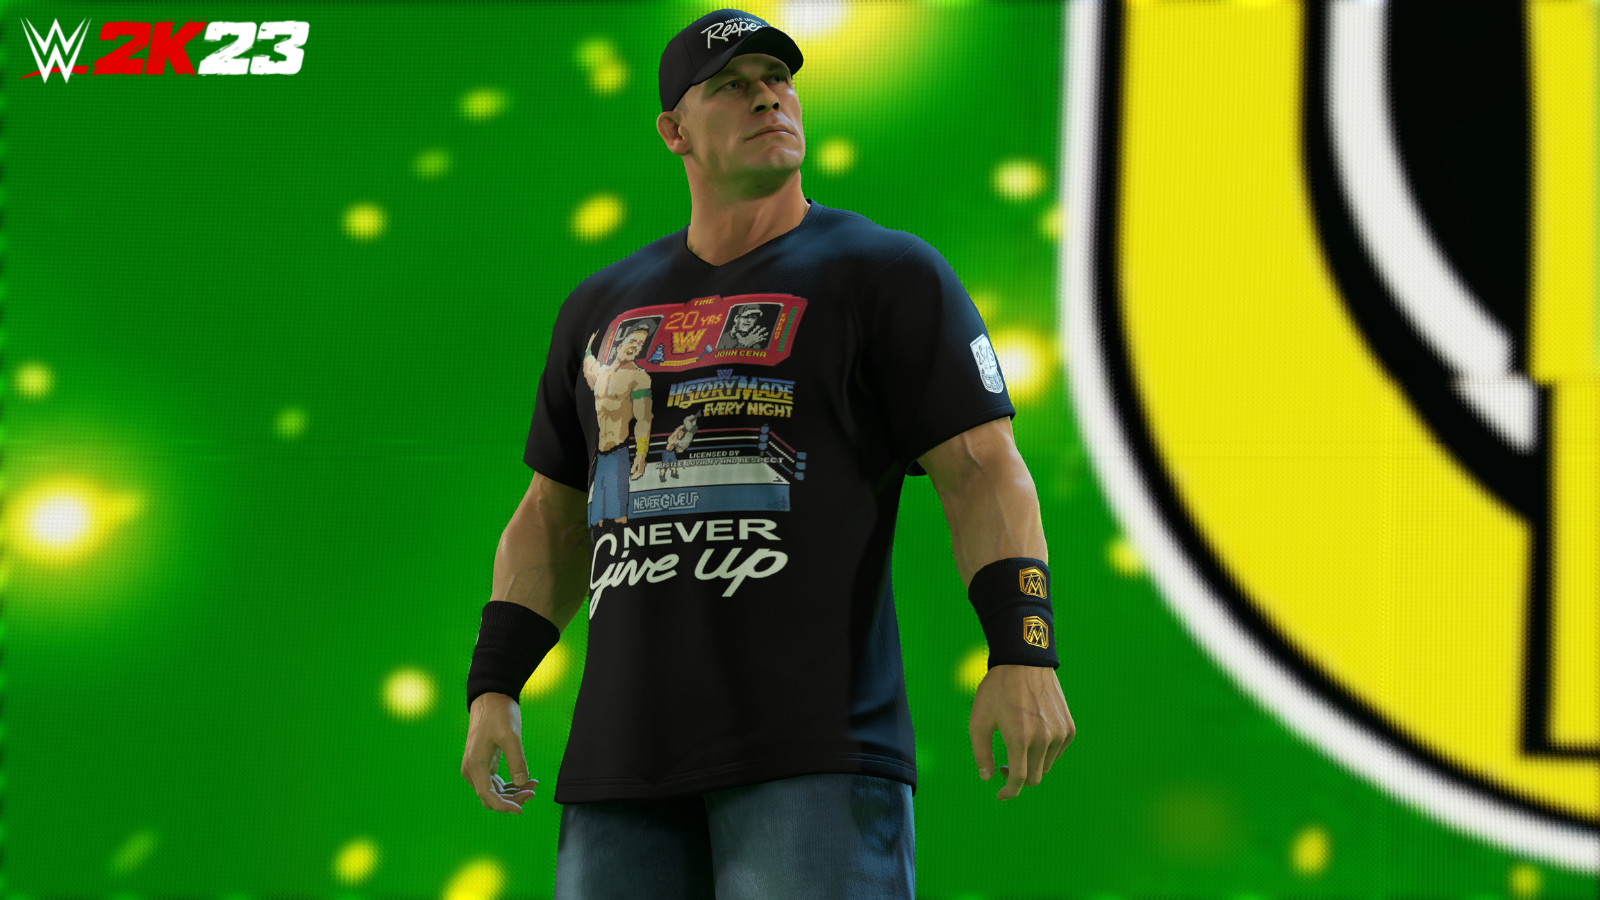 WWE 2K23 brings the pain with John Cena and Bad Bunny | Digital Trends